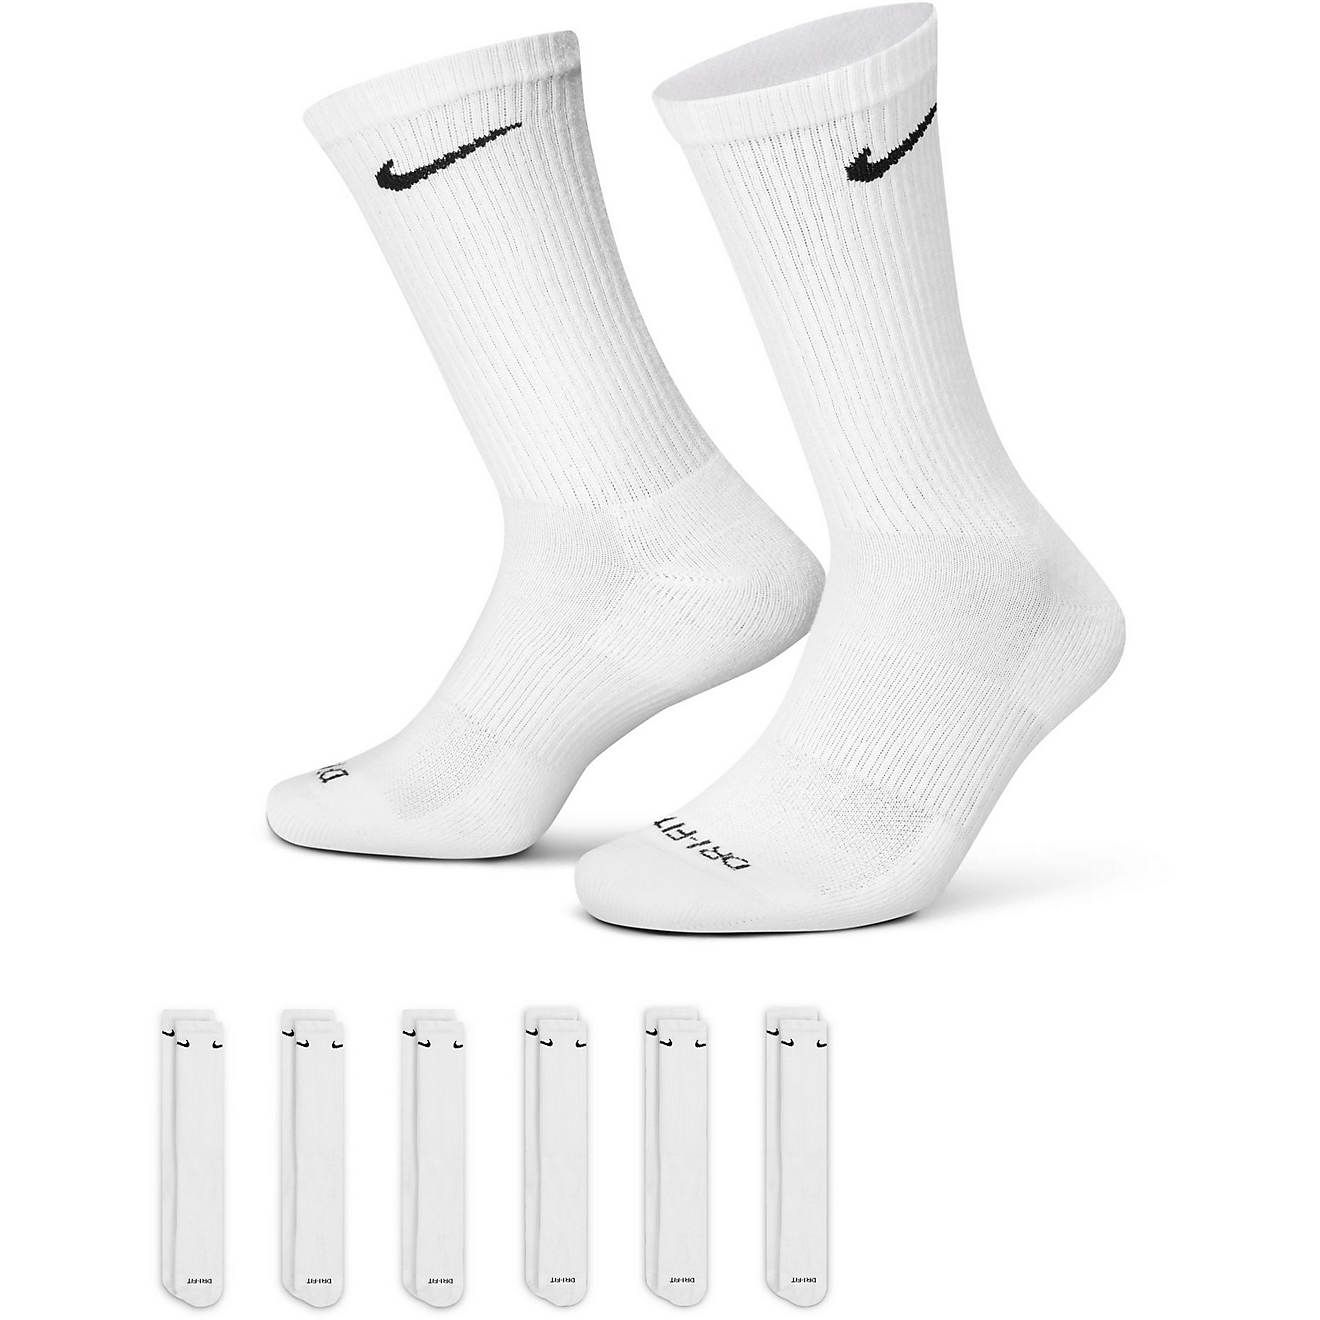 Nike Men's Everyday Plus Cushion Training Crew Socks 6 Pack | Academy Sports + Outdoor Affiliate